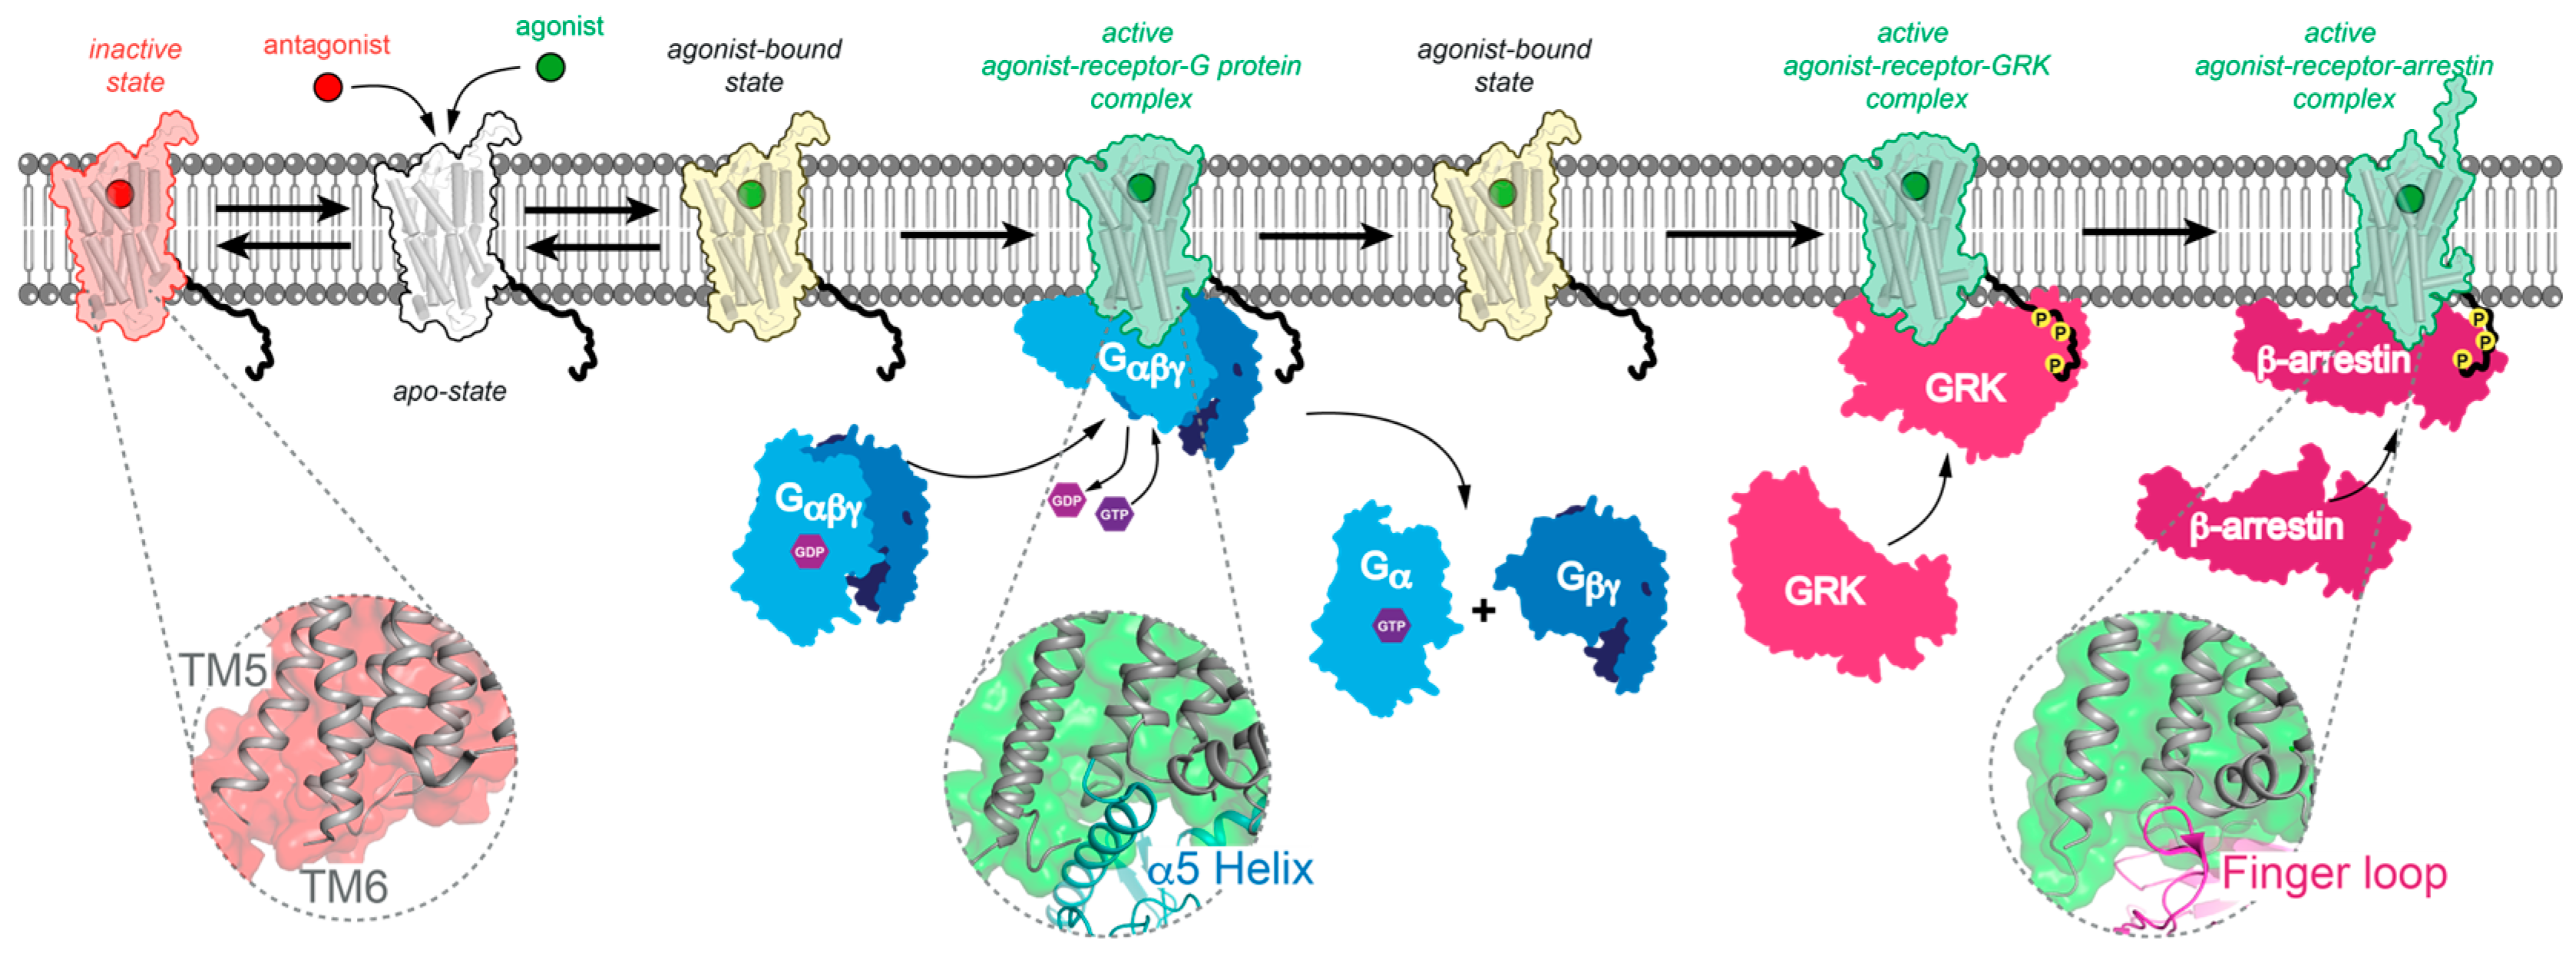 Membranes | Free Full-Text | Bringing GPCR Structural Biology to